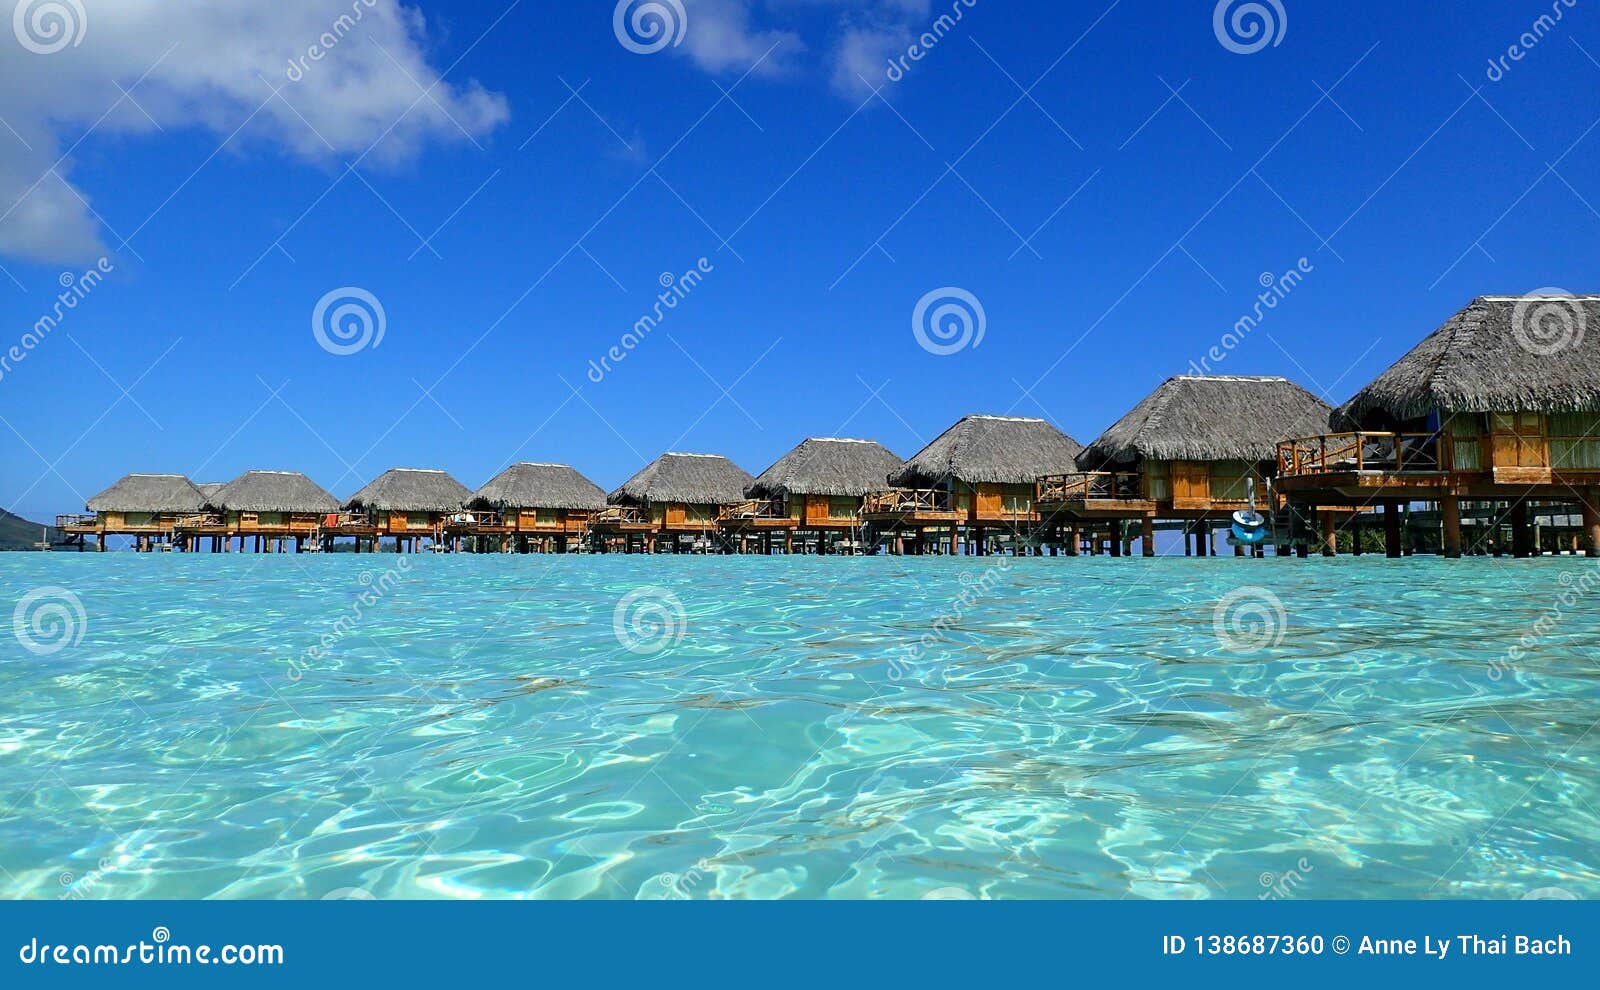 bora bora and the blue lagoon with cristalline water in the front, french polynesia